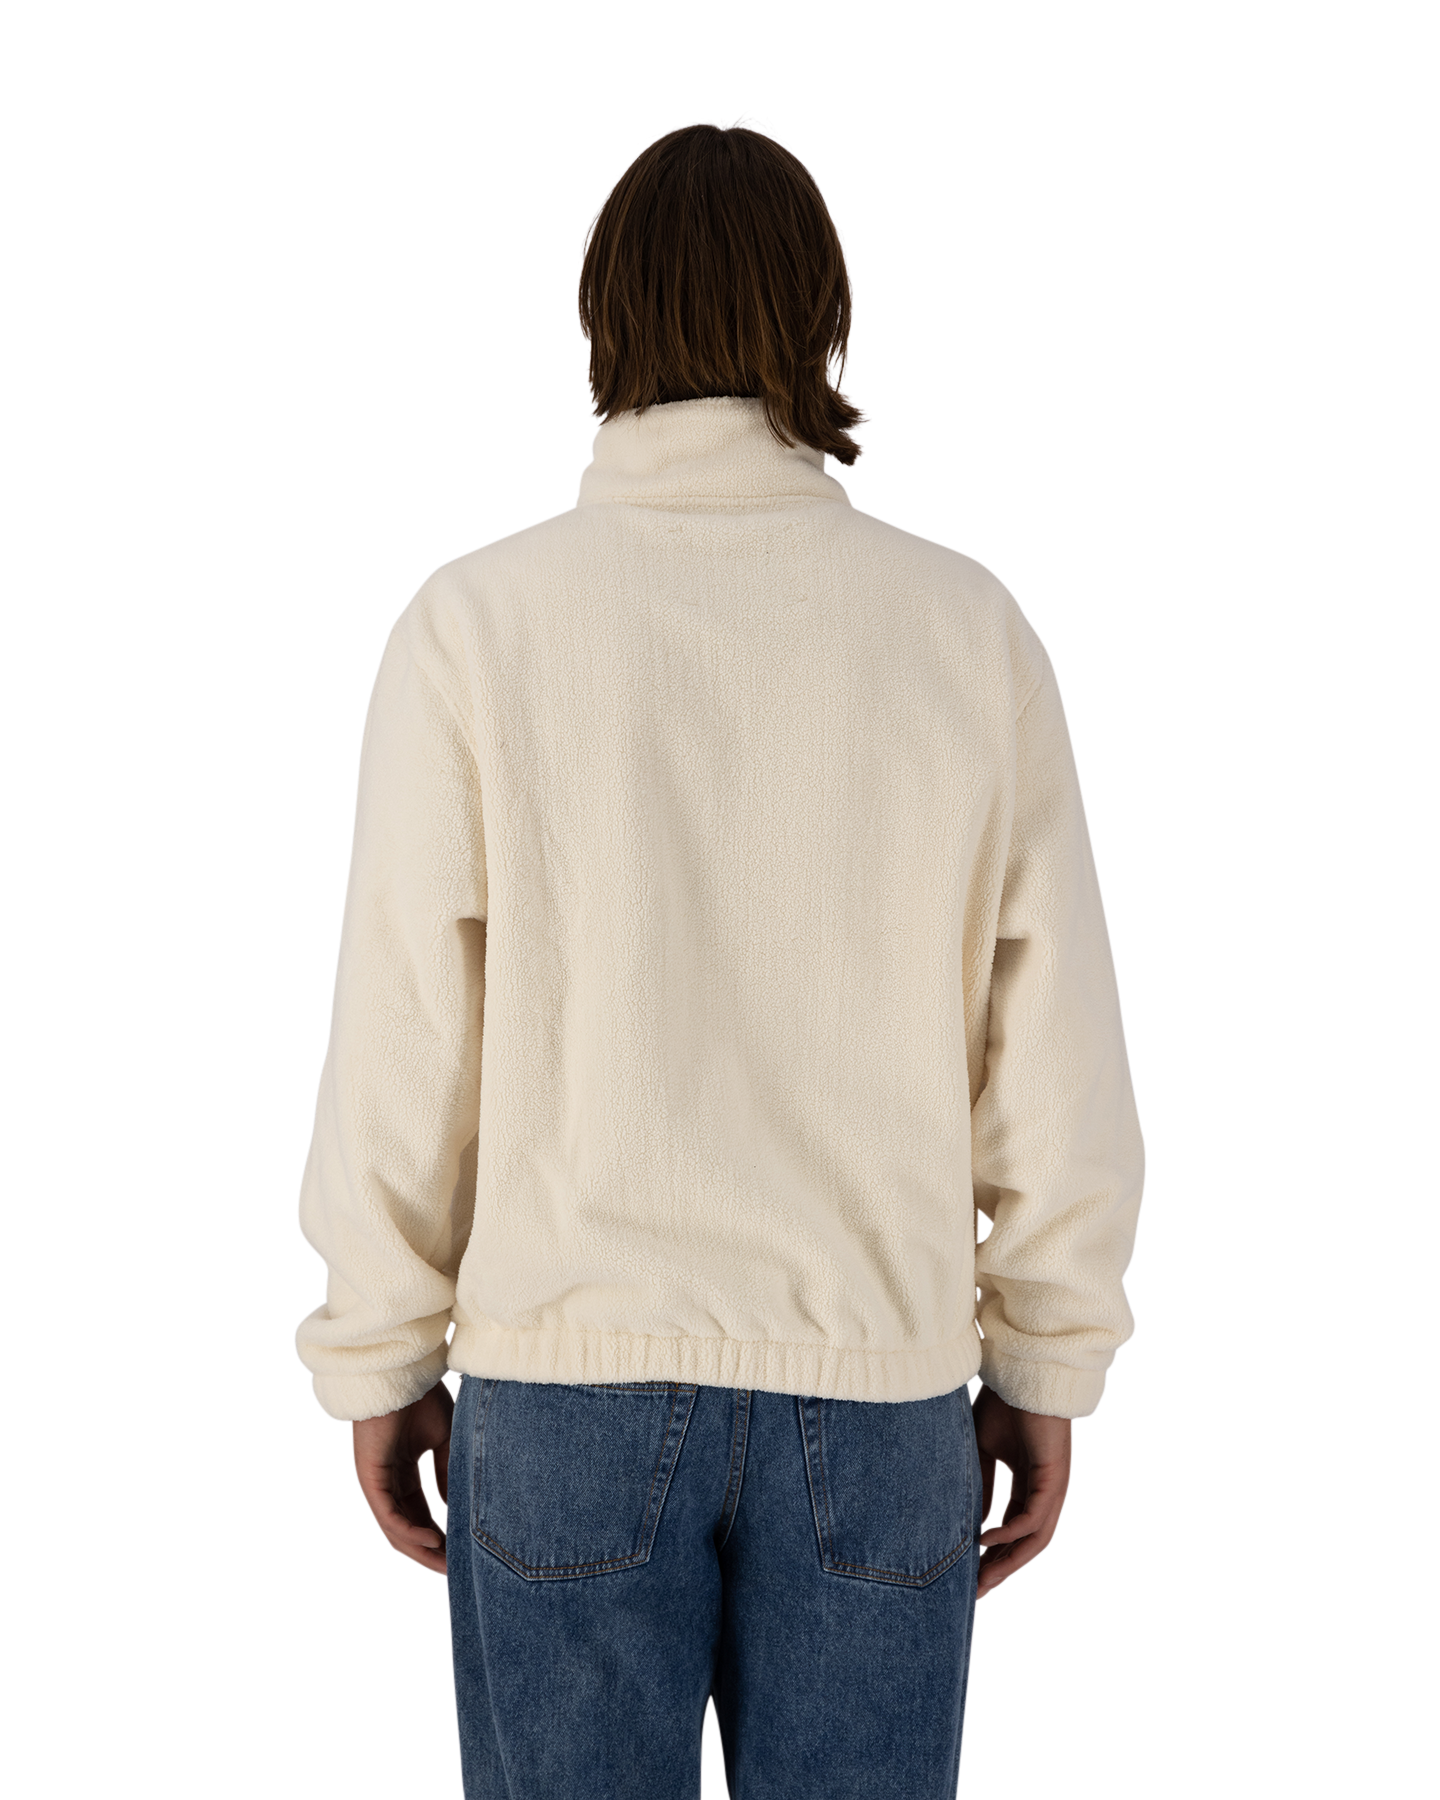 New Amsterdam Surf Association Oyster Fleece Off-White OFFWHITE 5